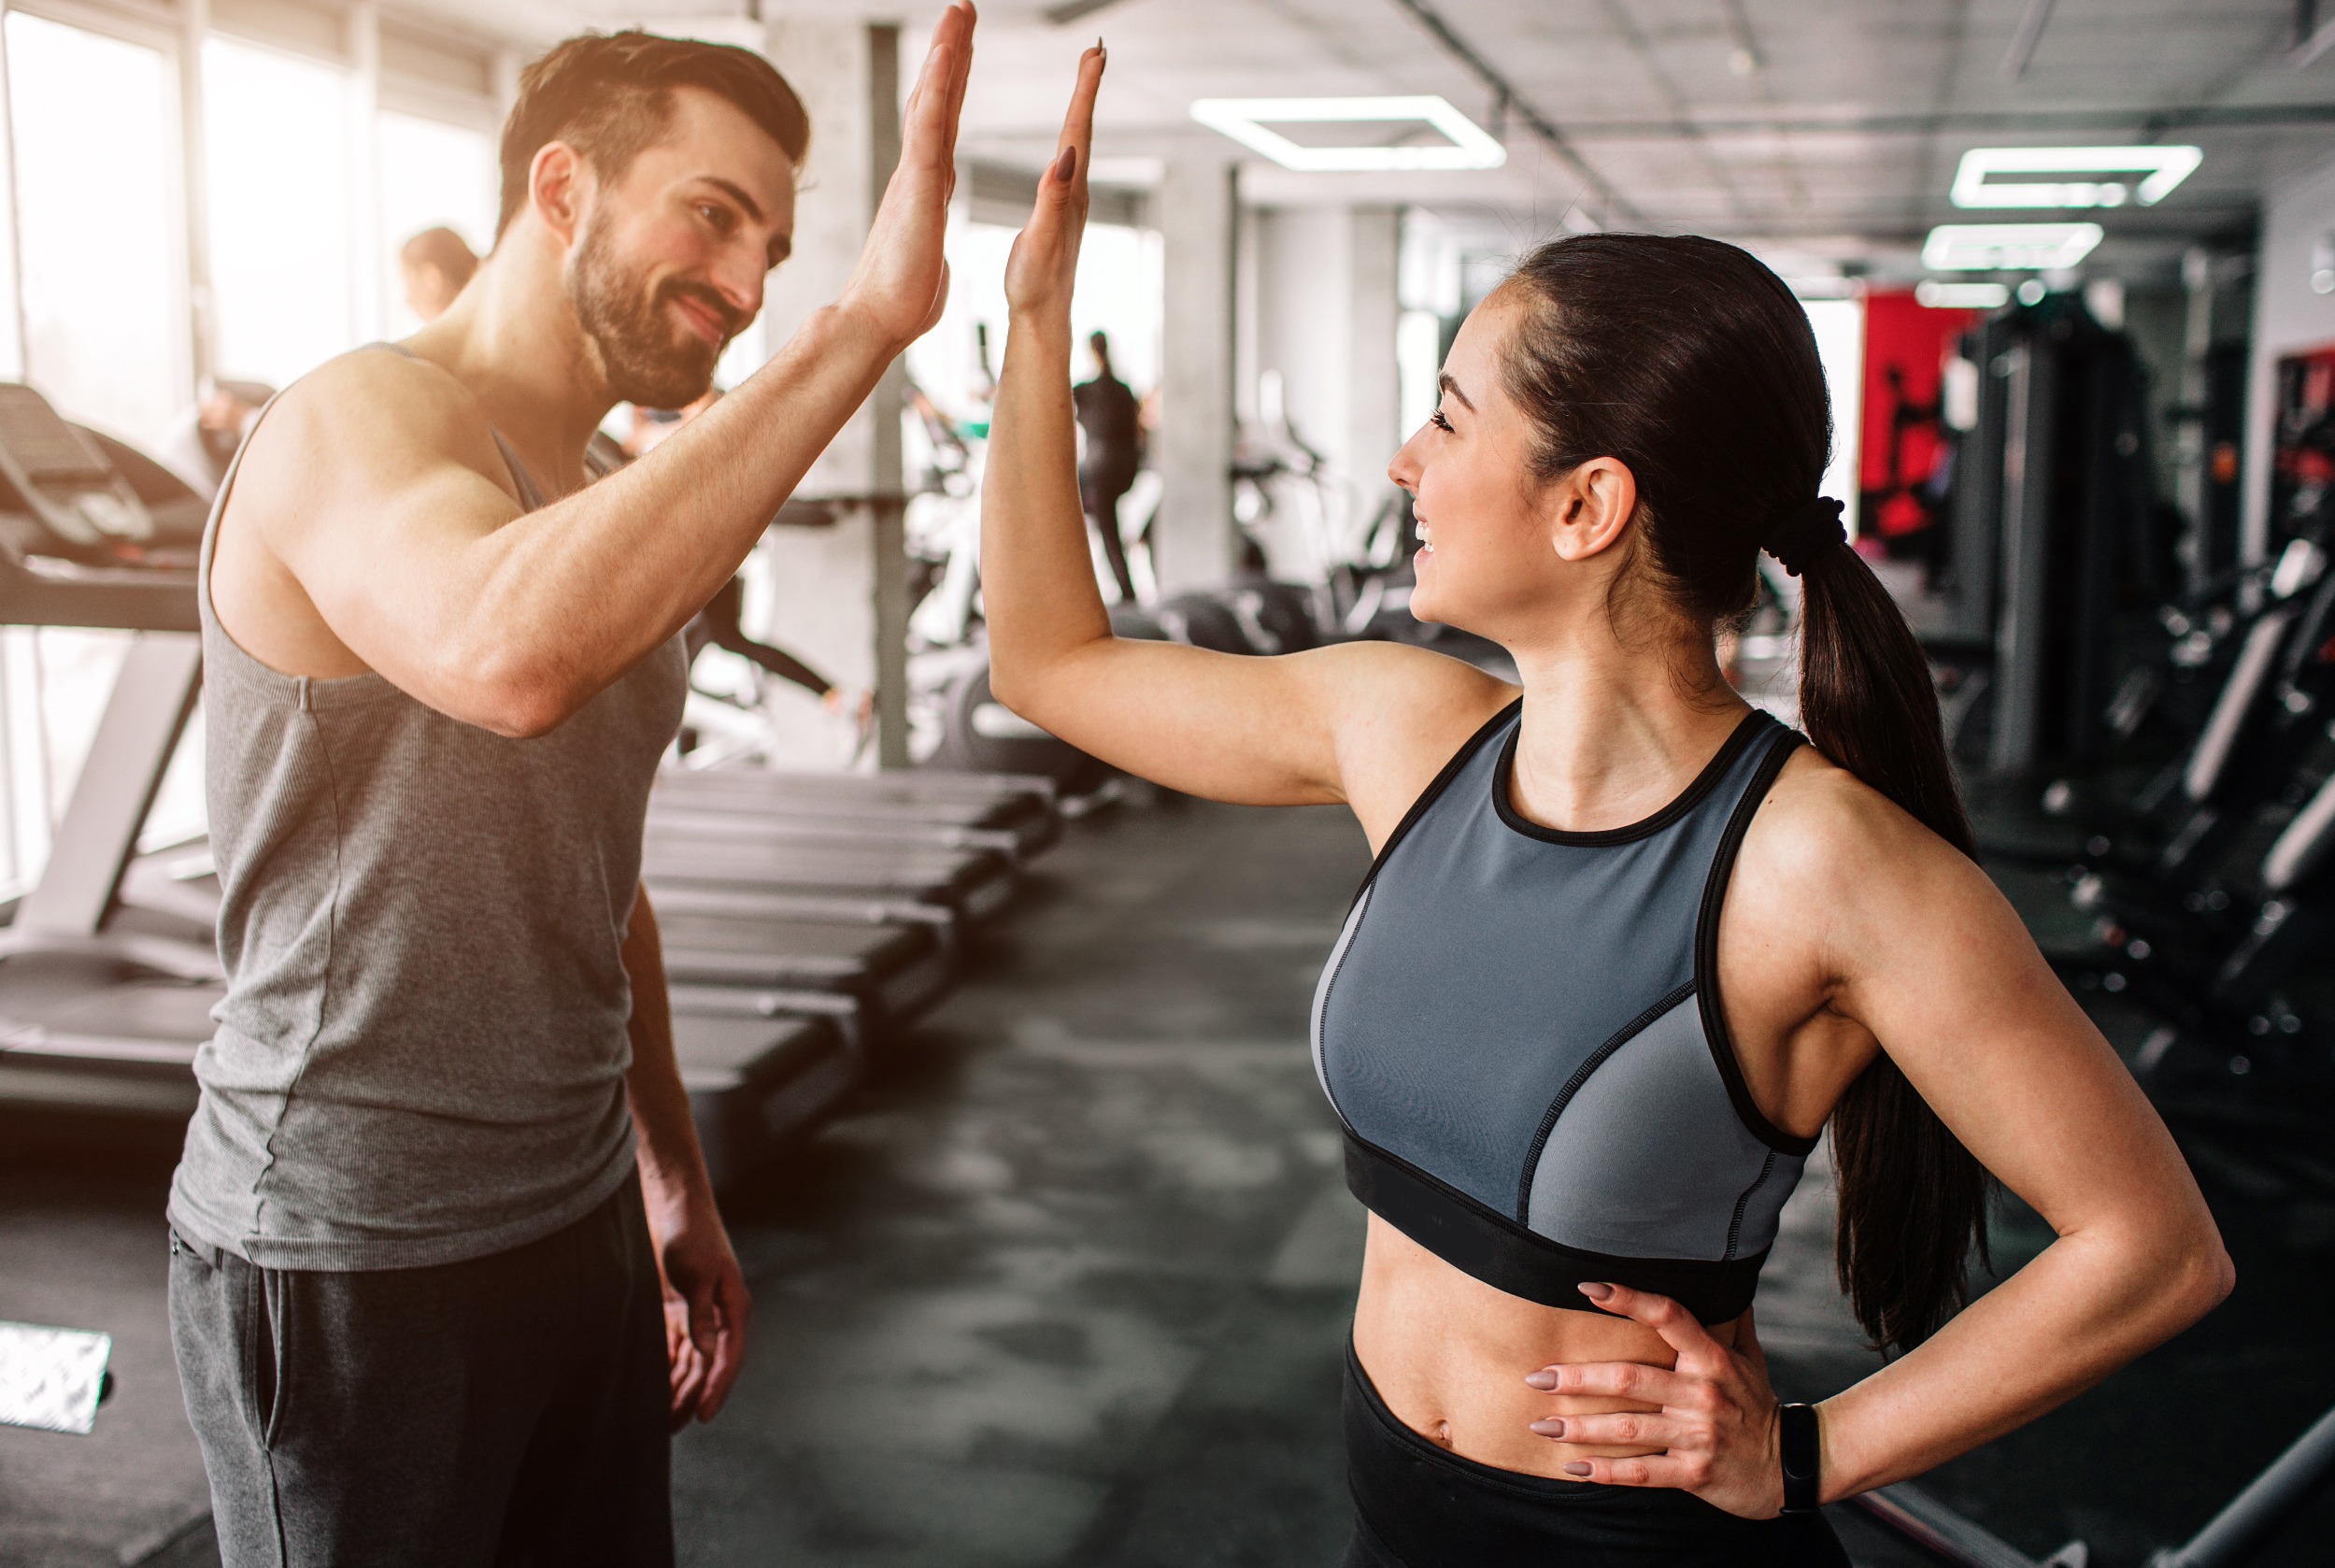 Couple giving each other a high five after a partner workouts.